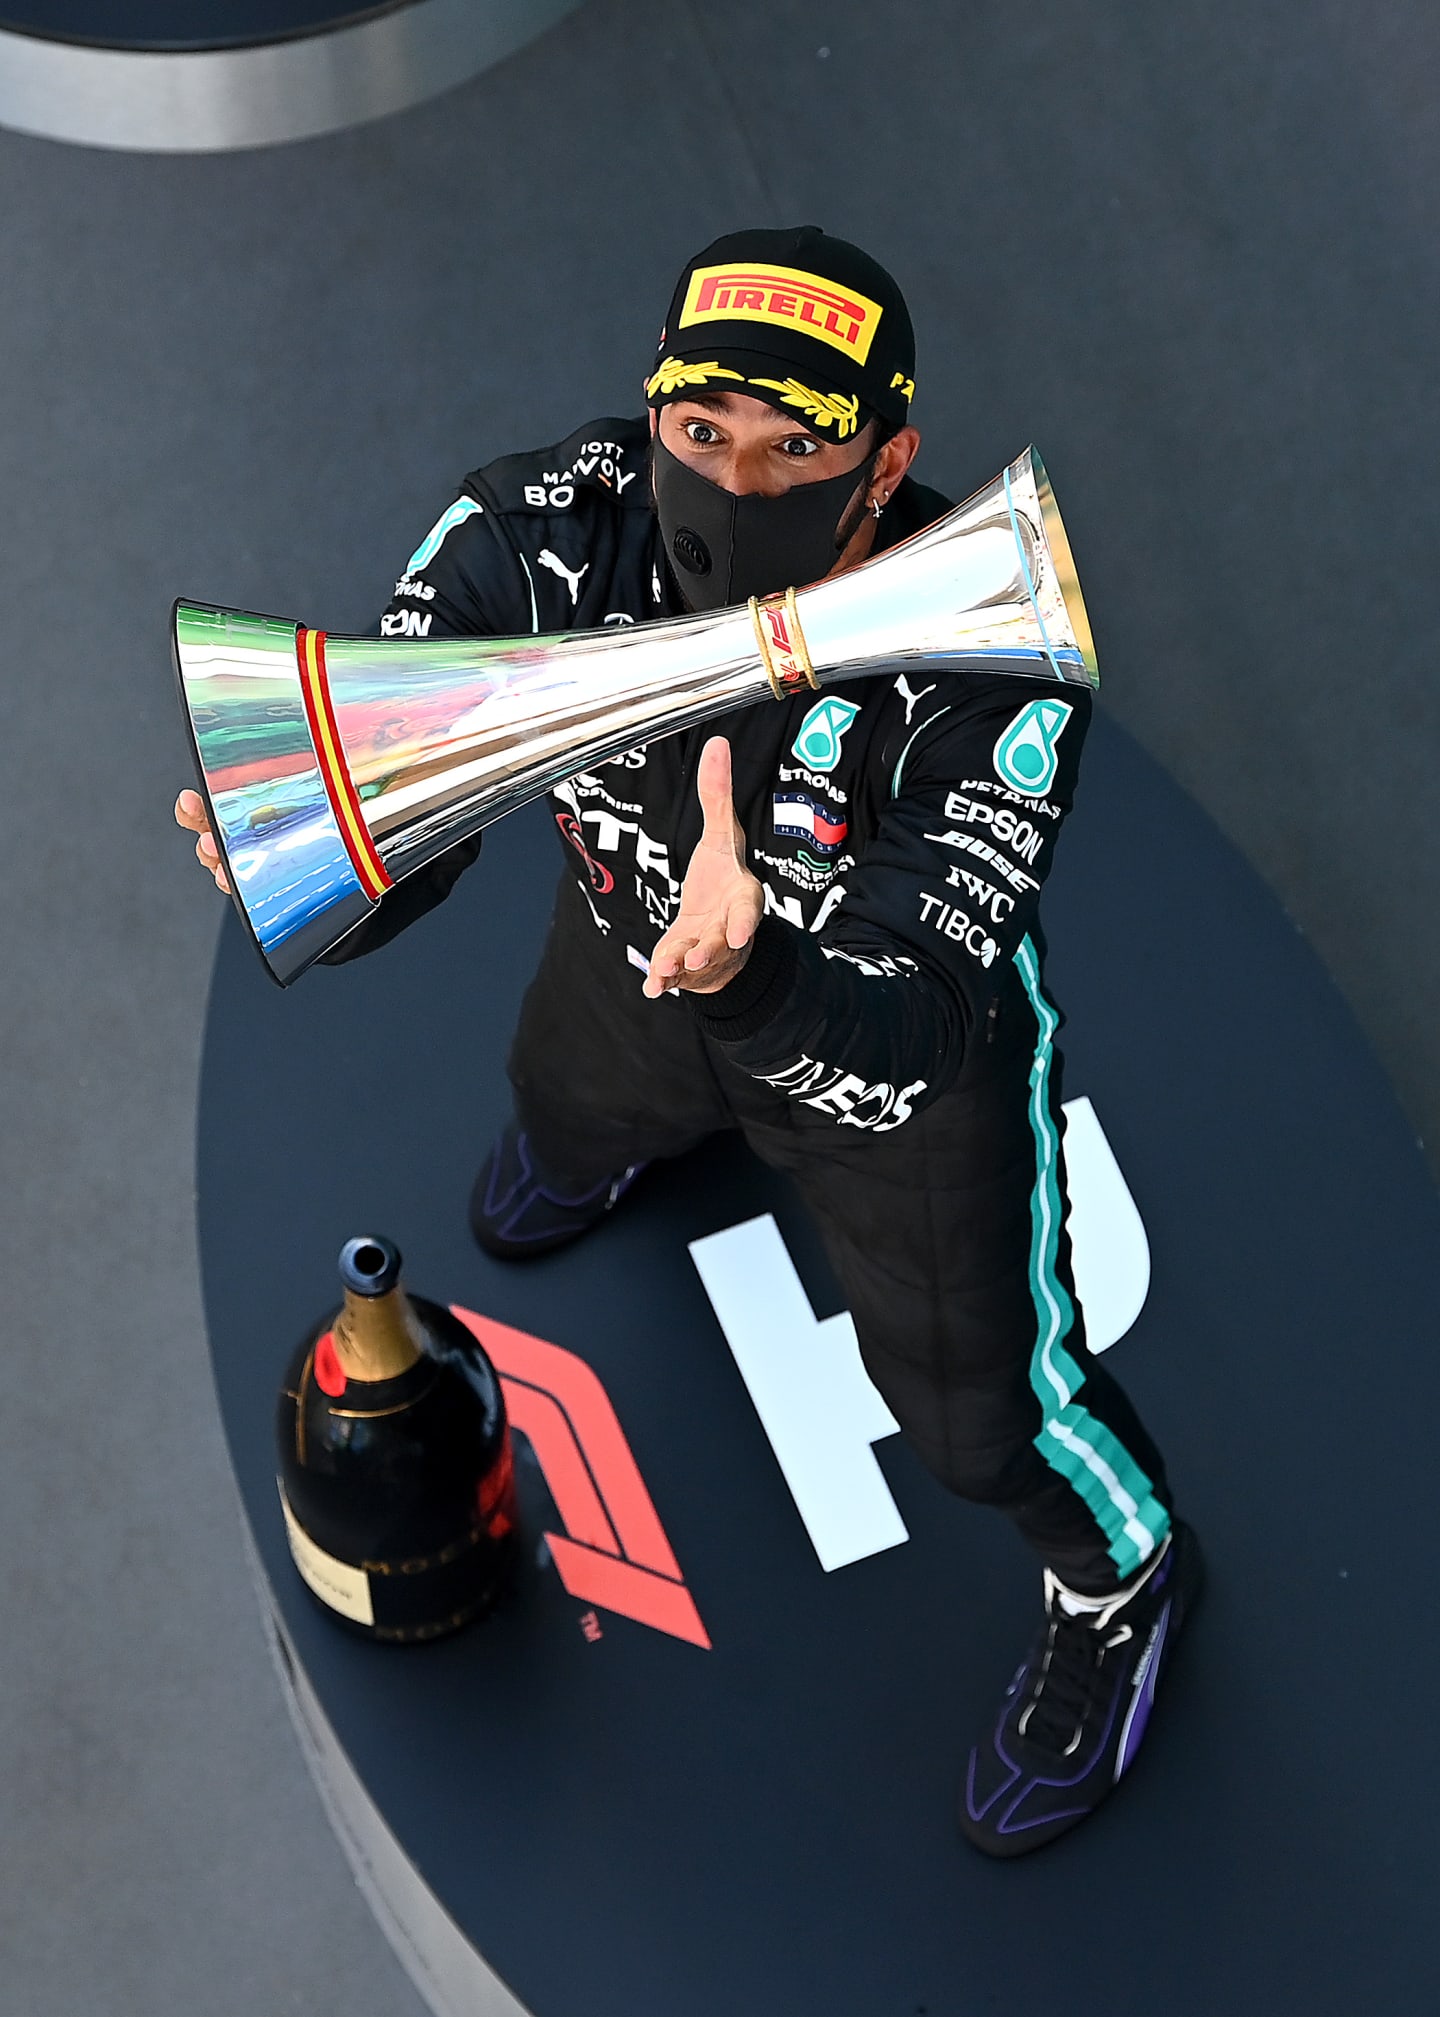 BARCELONA, SPAIN - AUGUST 16: Race winner Lewis Hamilton of Great Britain and Mercedes GP